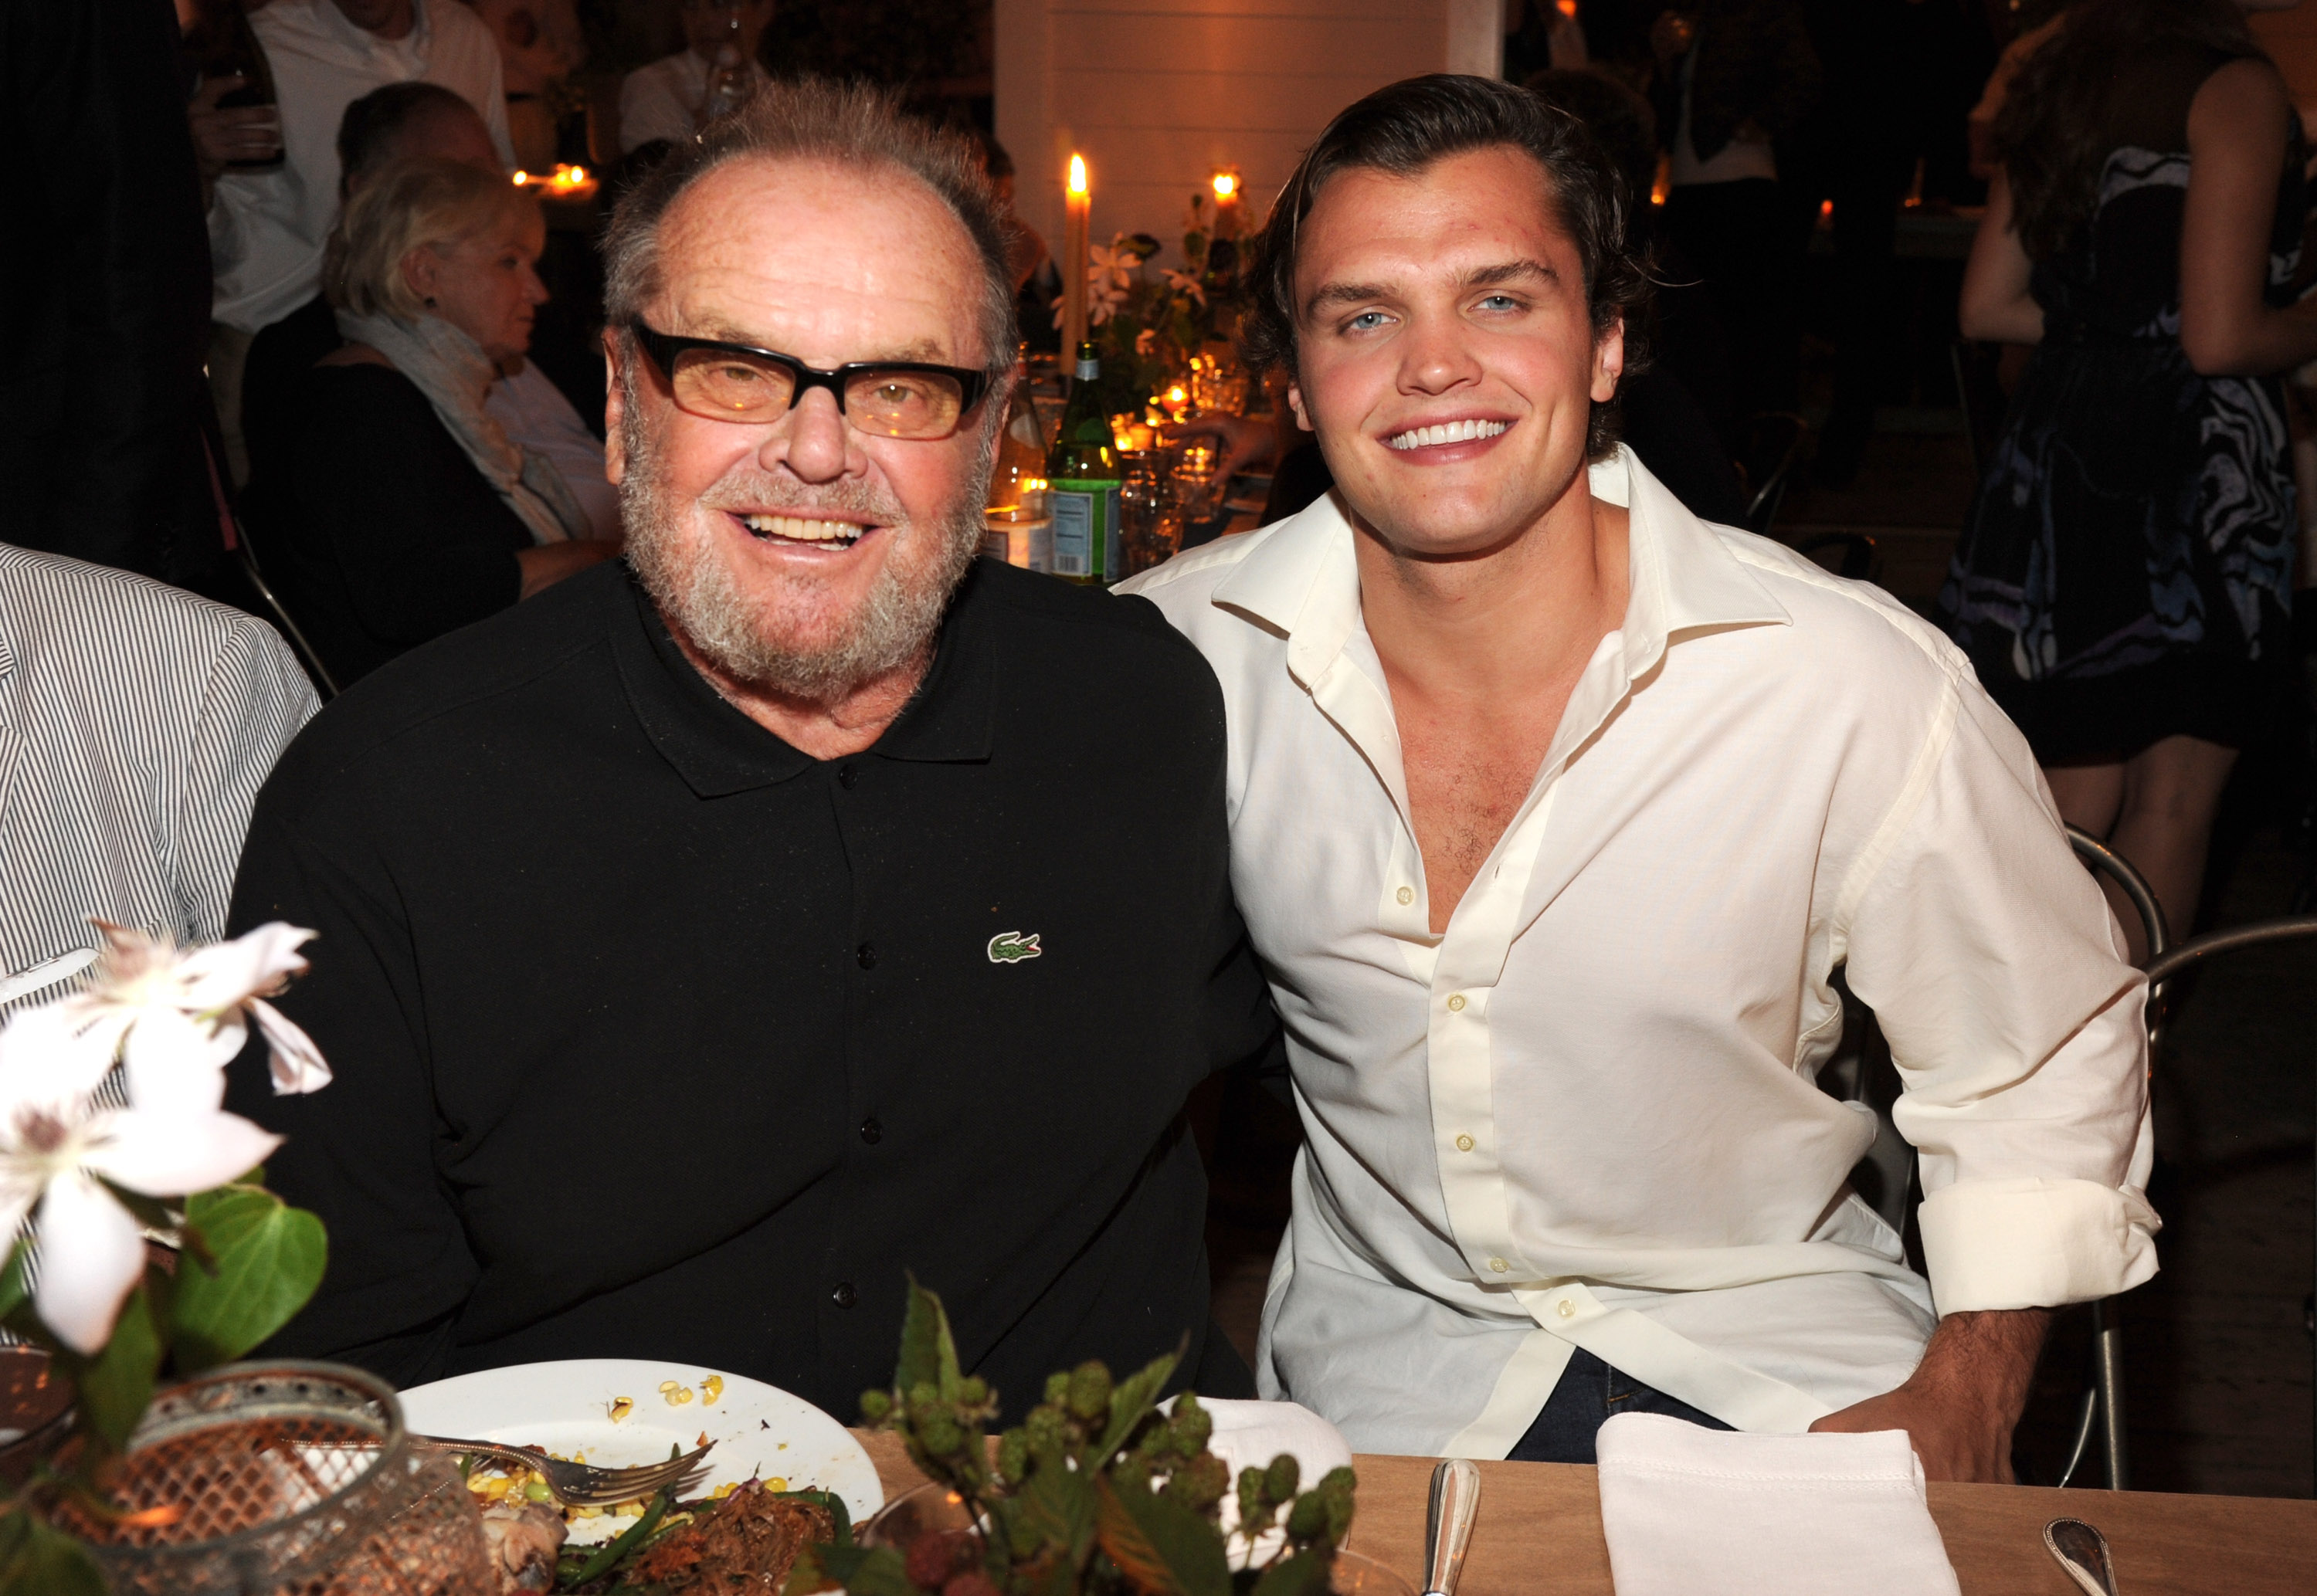 Jack Nicholson and Ray Nicholson at the Apollo in the Hamptons in East Hampton, New York on August 16, 2014 | Source: Getty Images